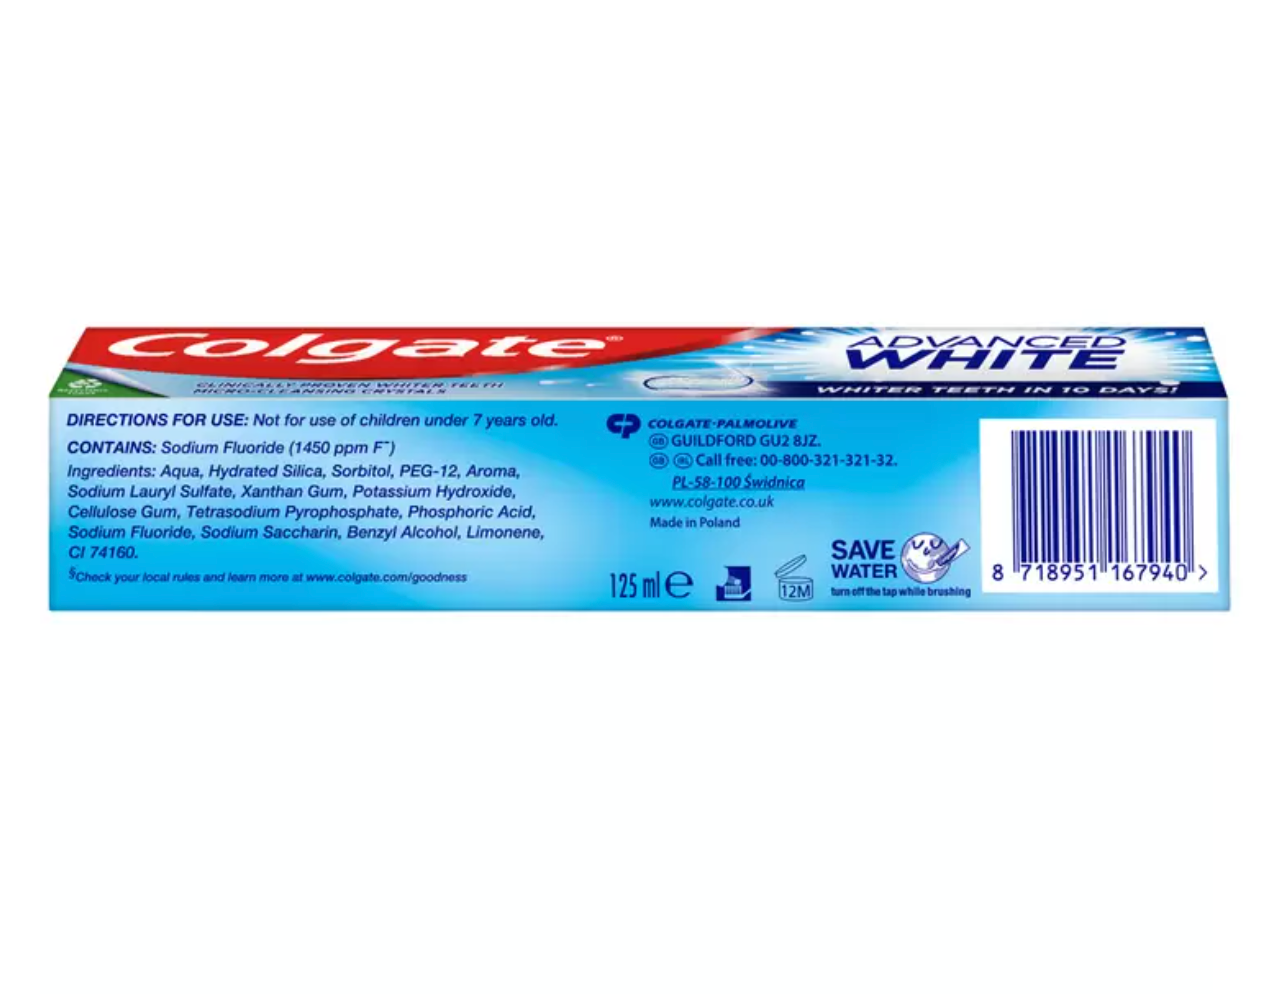 Colgate Advanced White Toothpaste - 6 x 125ml: Unveil a Brighter Smile Every Day